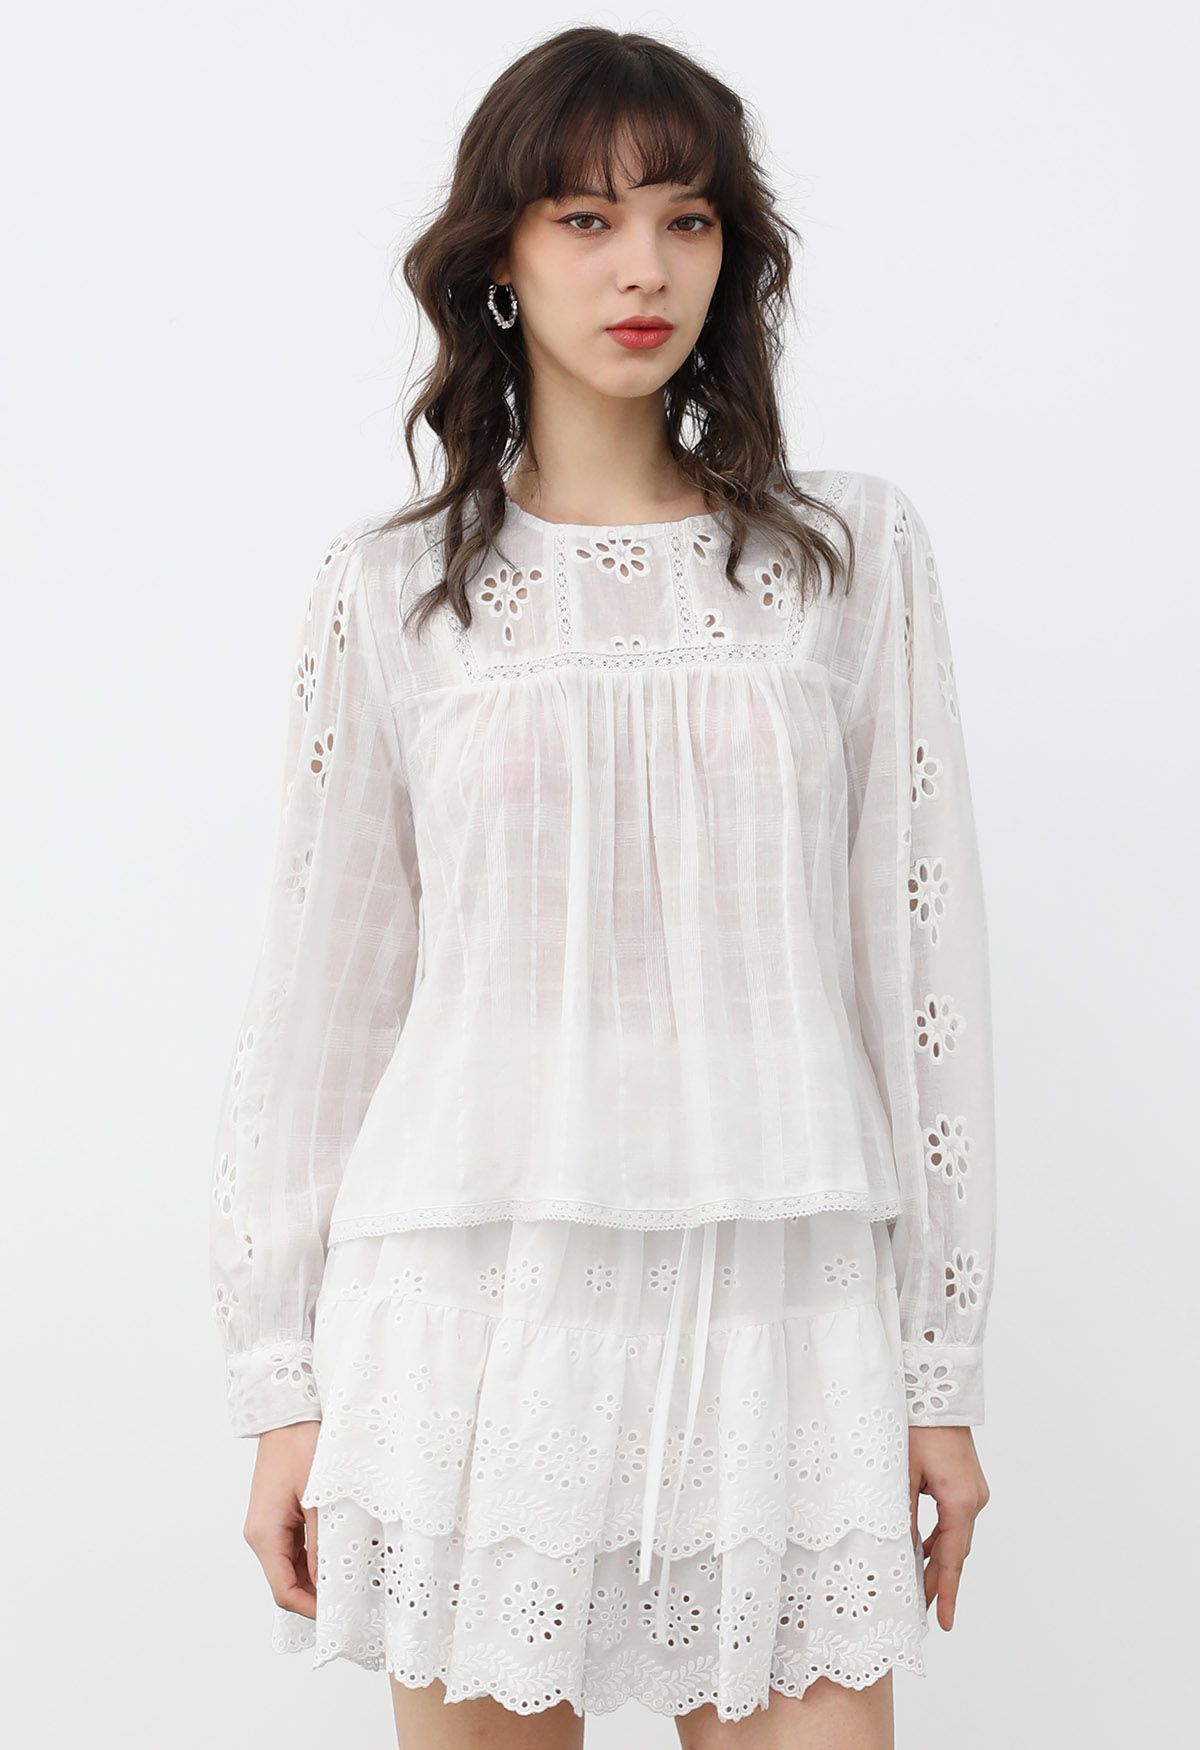 Eyelet Embroidery Tiered Mini Skirt in White